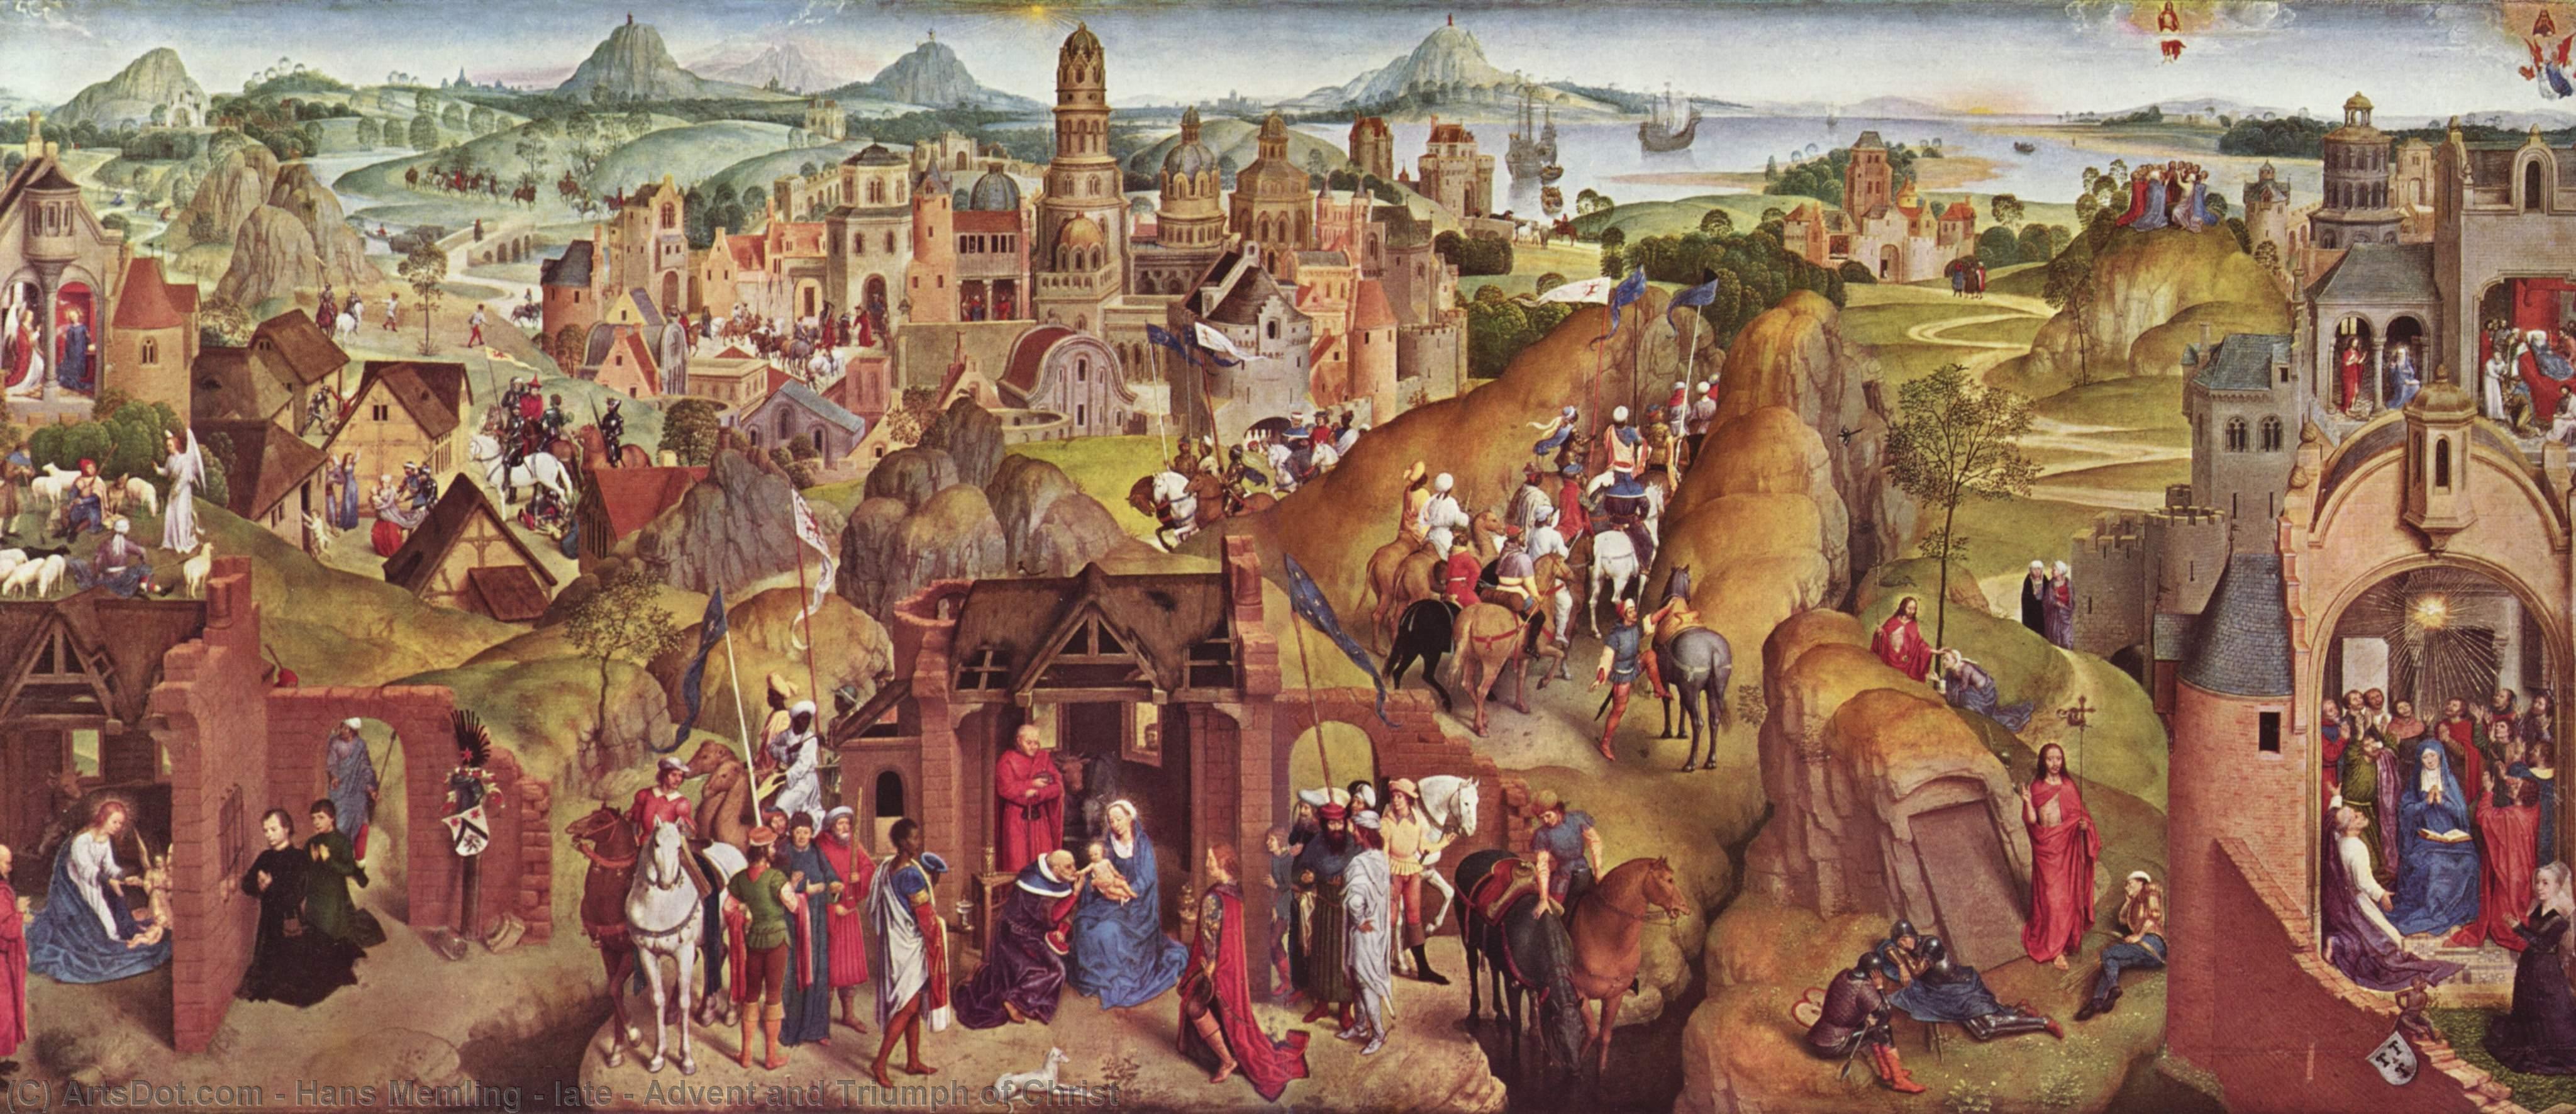 WikiOO.org - 백과 사전 - 회화, 삽화 Hans Memling - late - Advent and Triumph of Christ